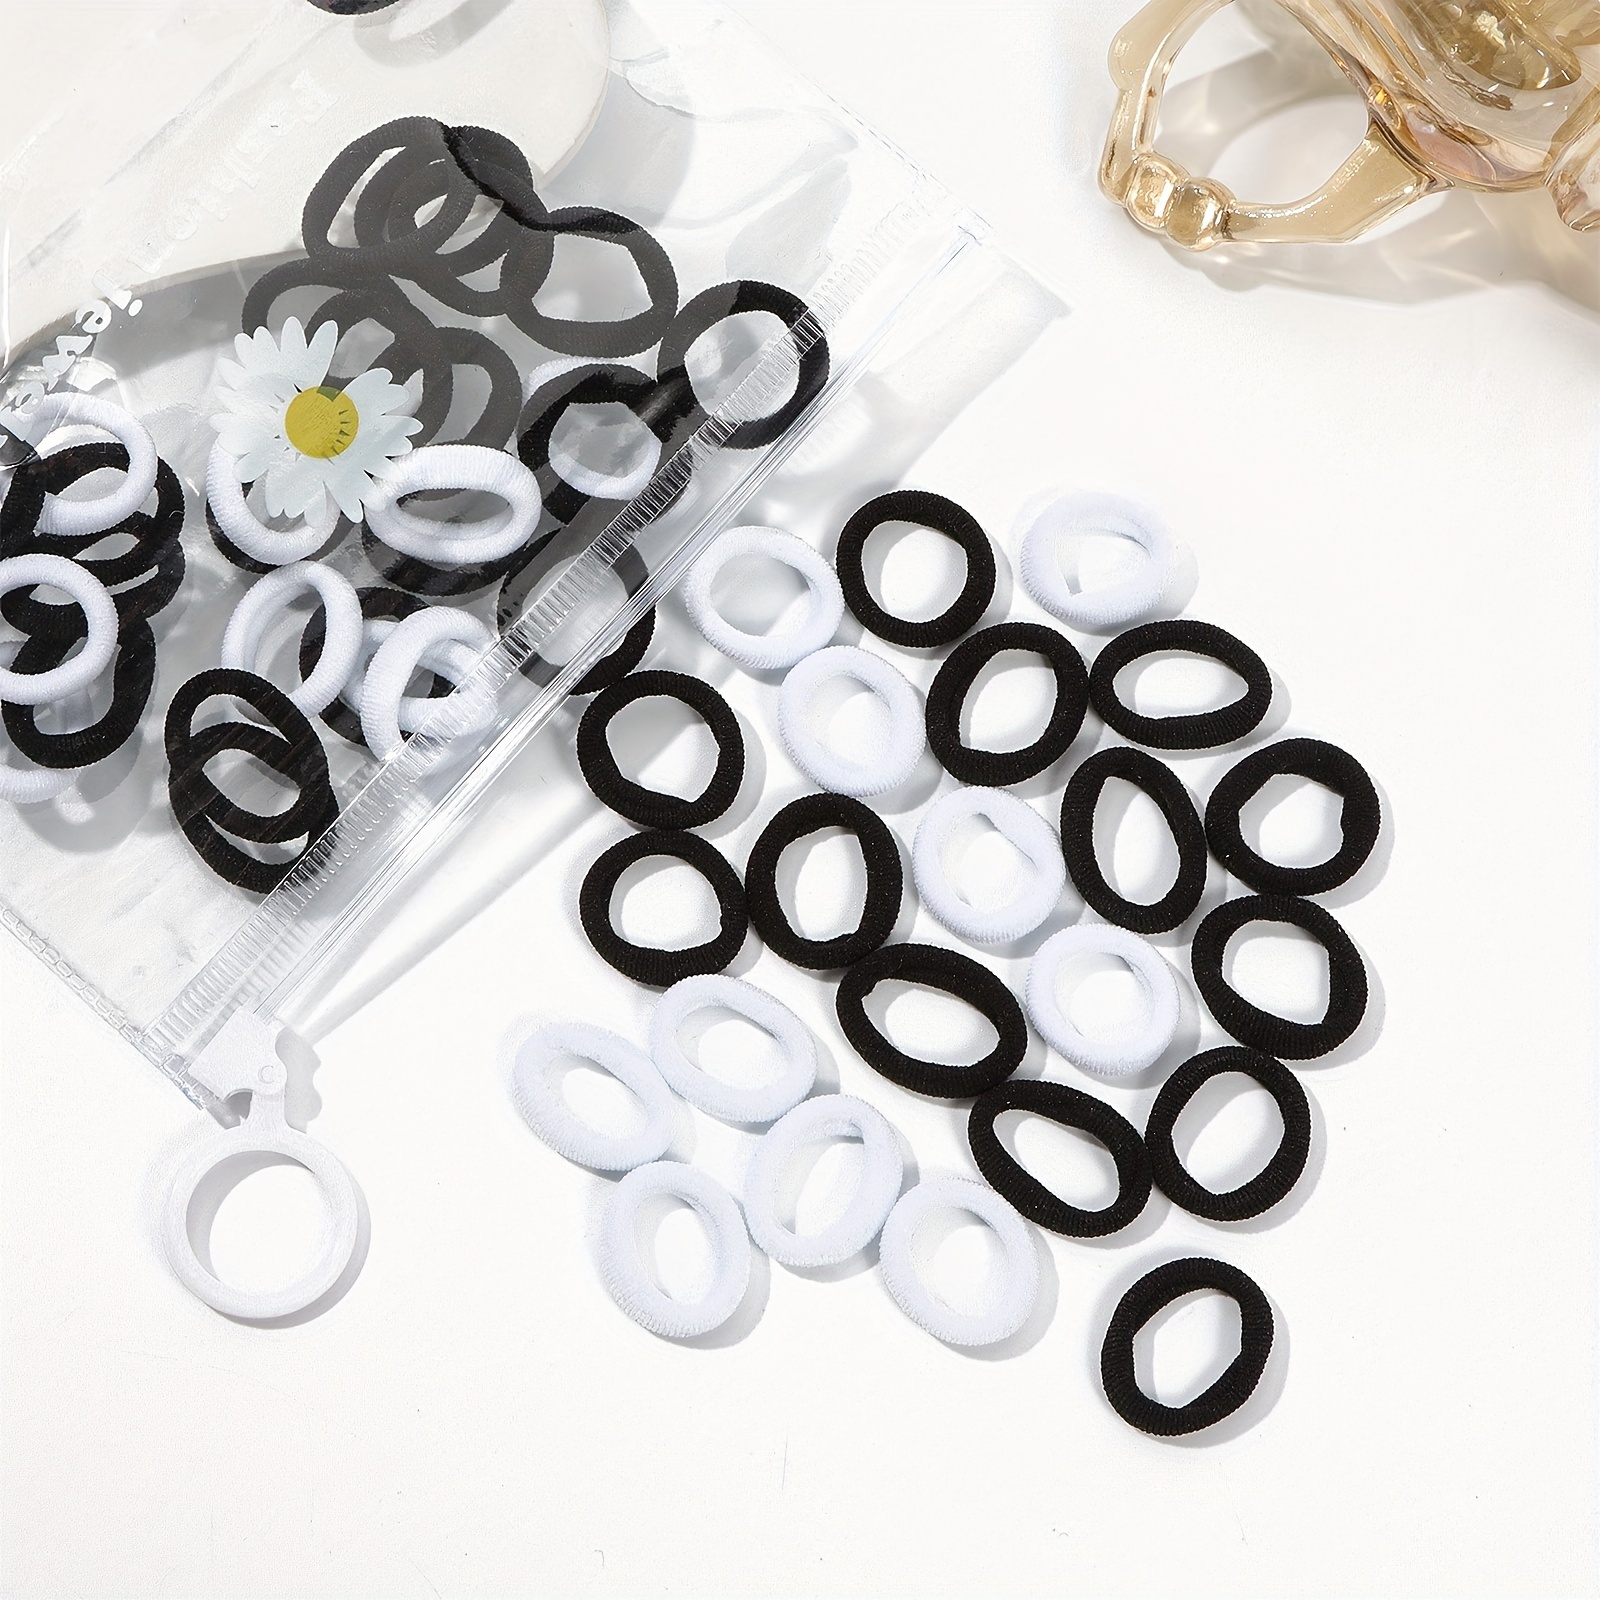 

50 Pcs Black White Hair Ties Set For Women, Seamless Thick Hair Holders, Elastics Rubber Bands, No Damage For Thick Heavy & Curly Hair